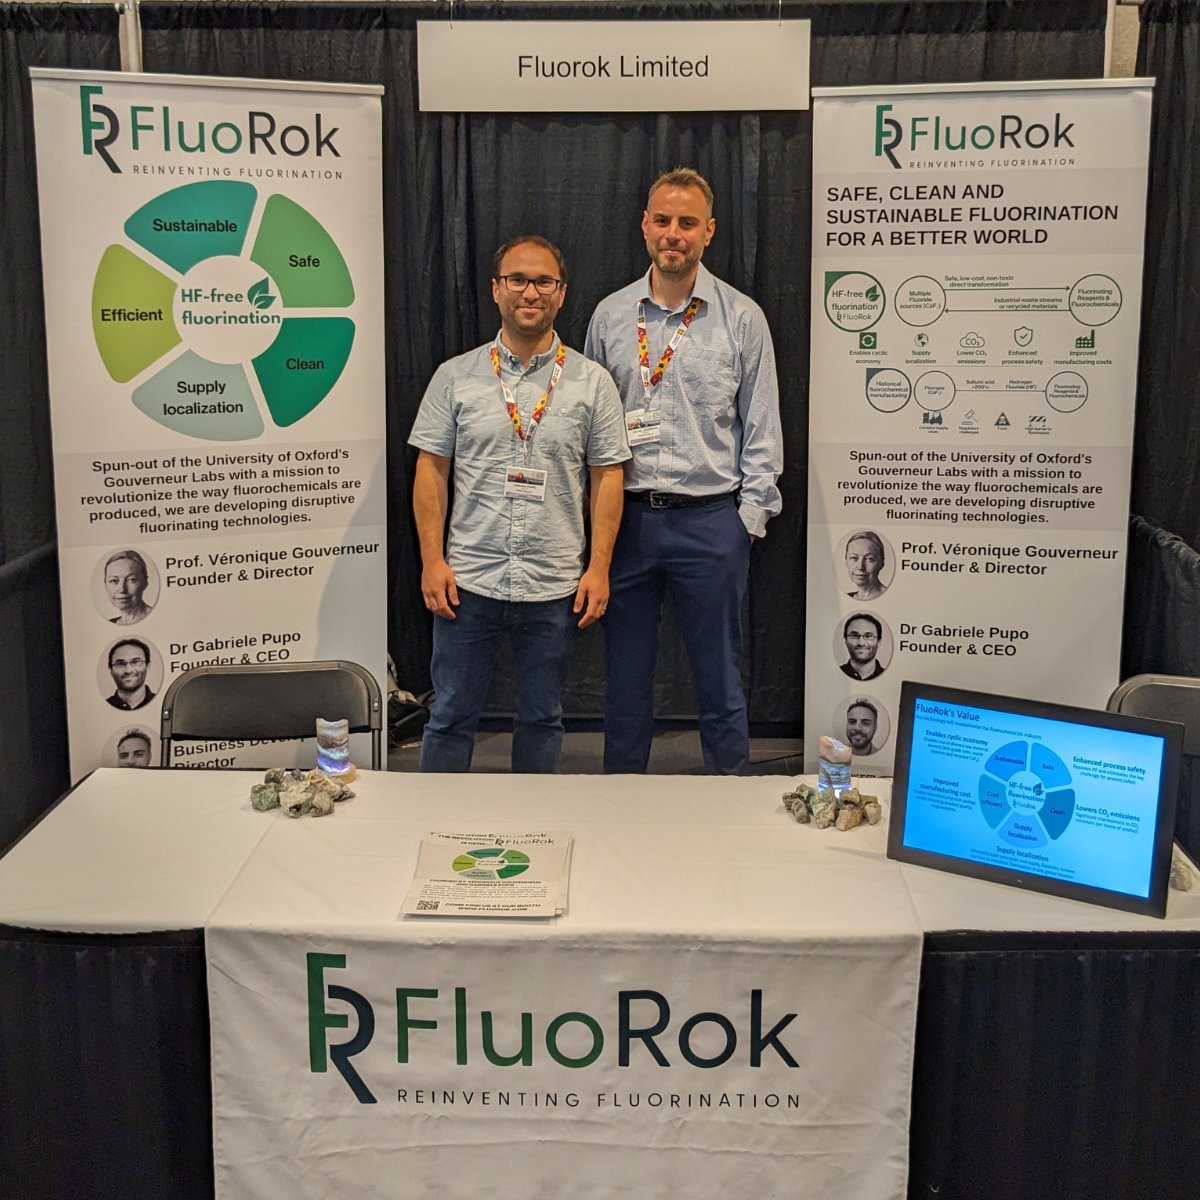 Come say hello👋We’re in beautiful Québec City at 23rd ISFC/ISoFT ‘23 and would love to chat about how @fluorok is revolutionizing fluorochemical production for a safer, cleaner, better world #fluoRok #fluo_Rok #fluorination #fluorochemicalrevolution isfc2023.org